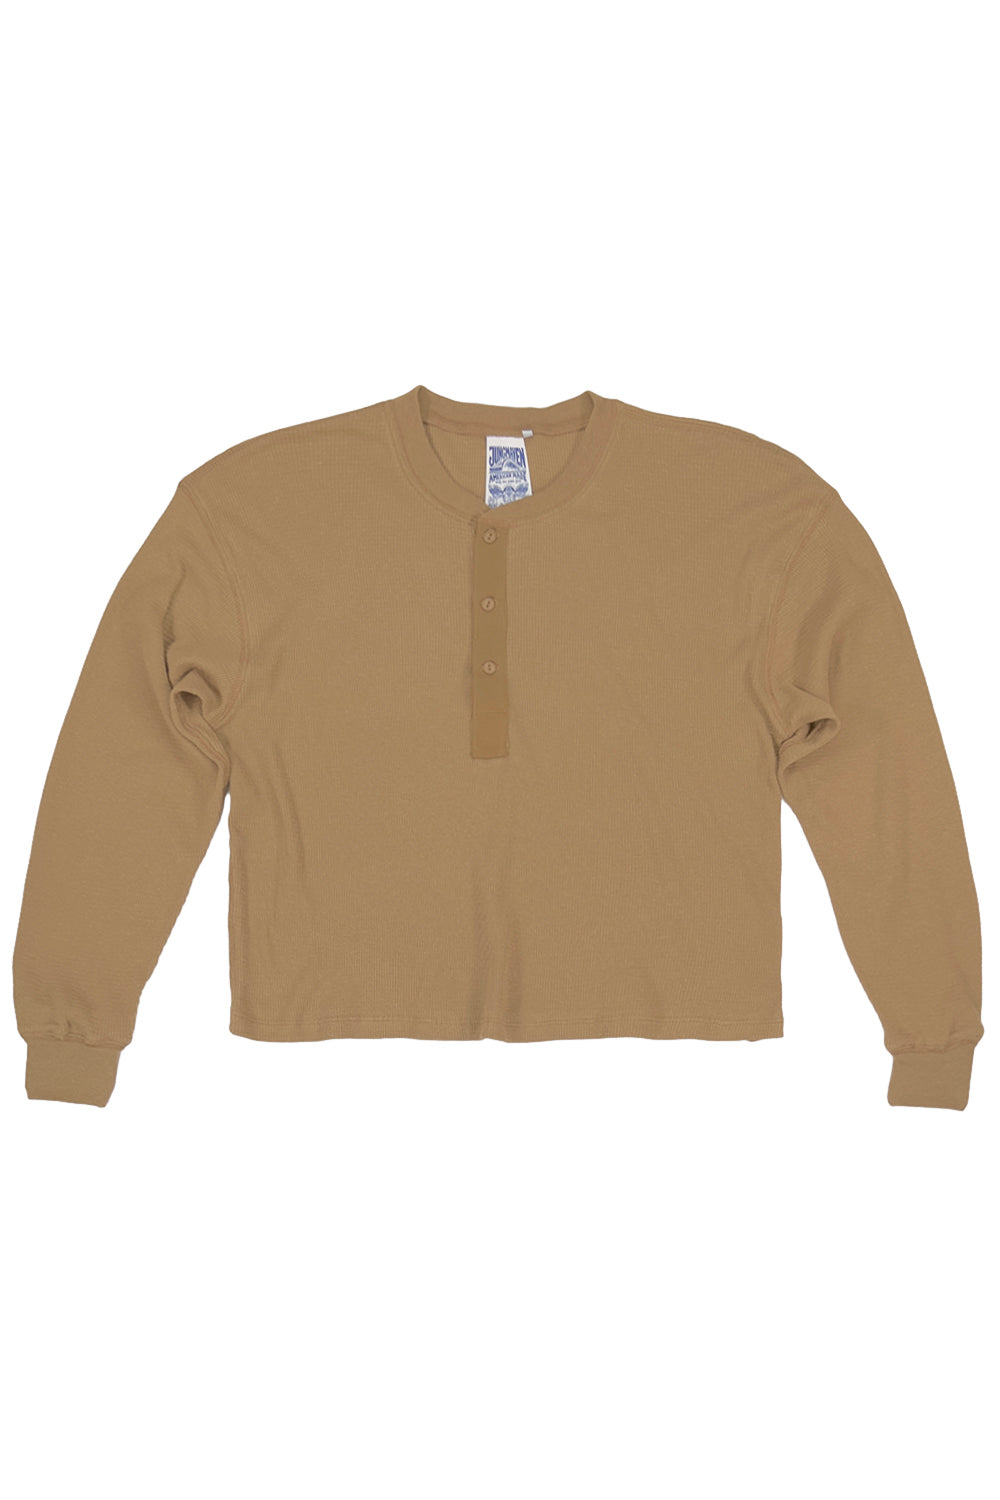 Mesa Cropped Thermal Henley | Jungmaven Hemp Clothing & Accessories / Color:Coyote